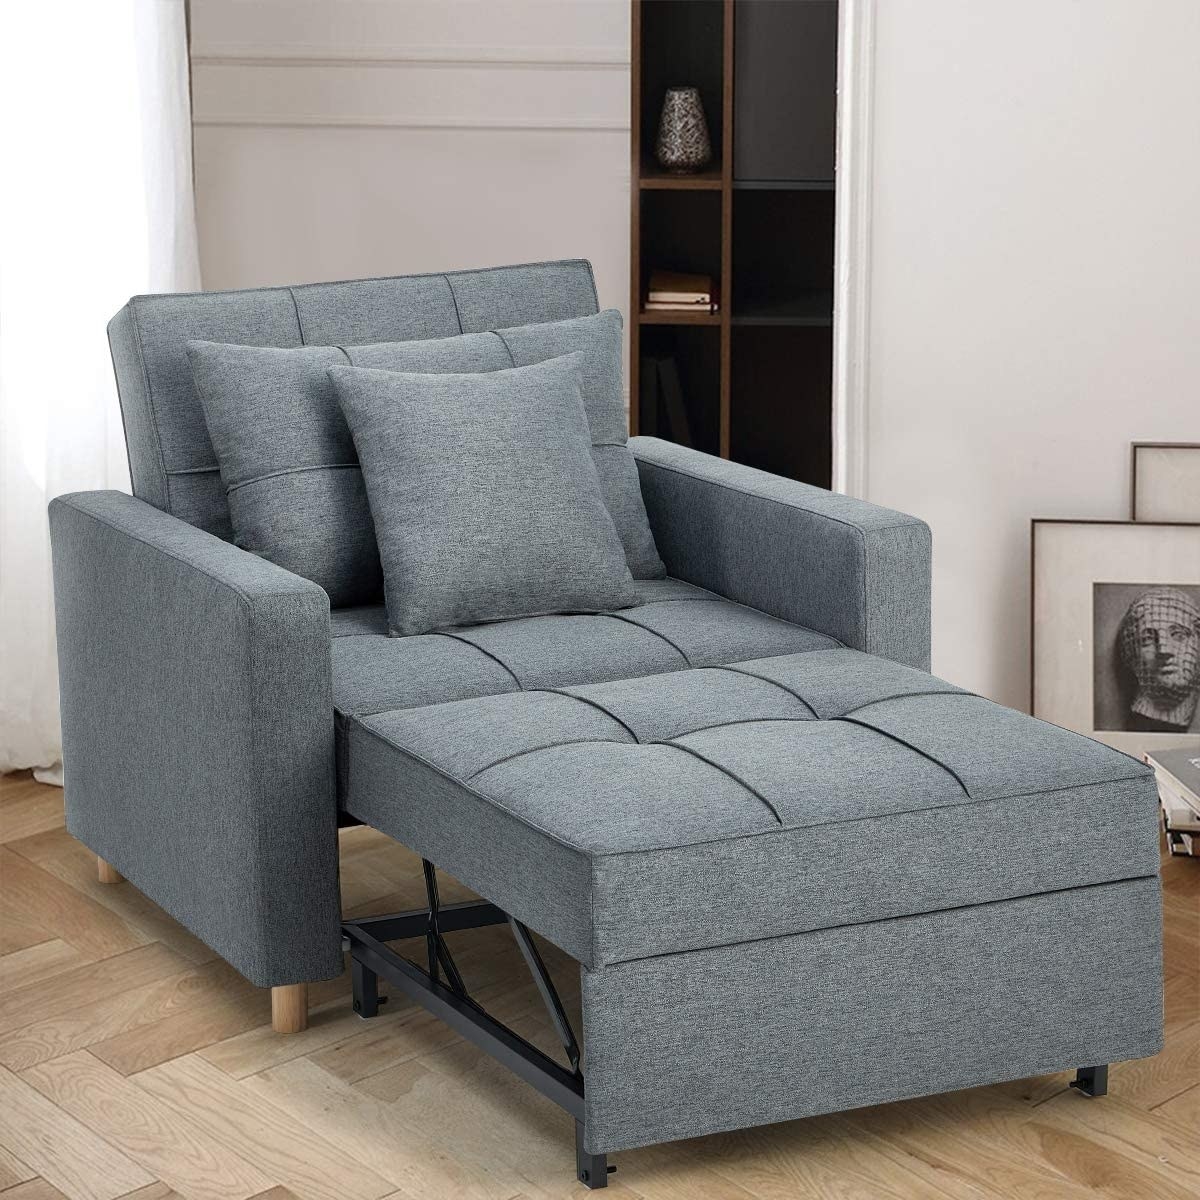 A 3-in-1 sofa chair bed